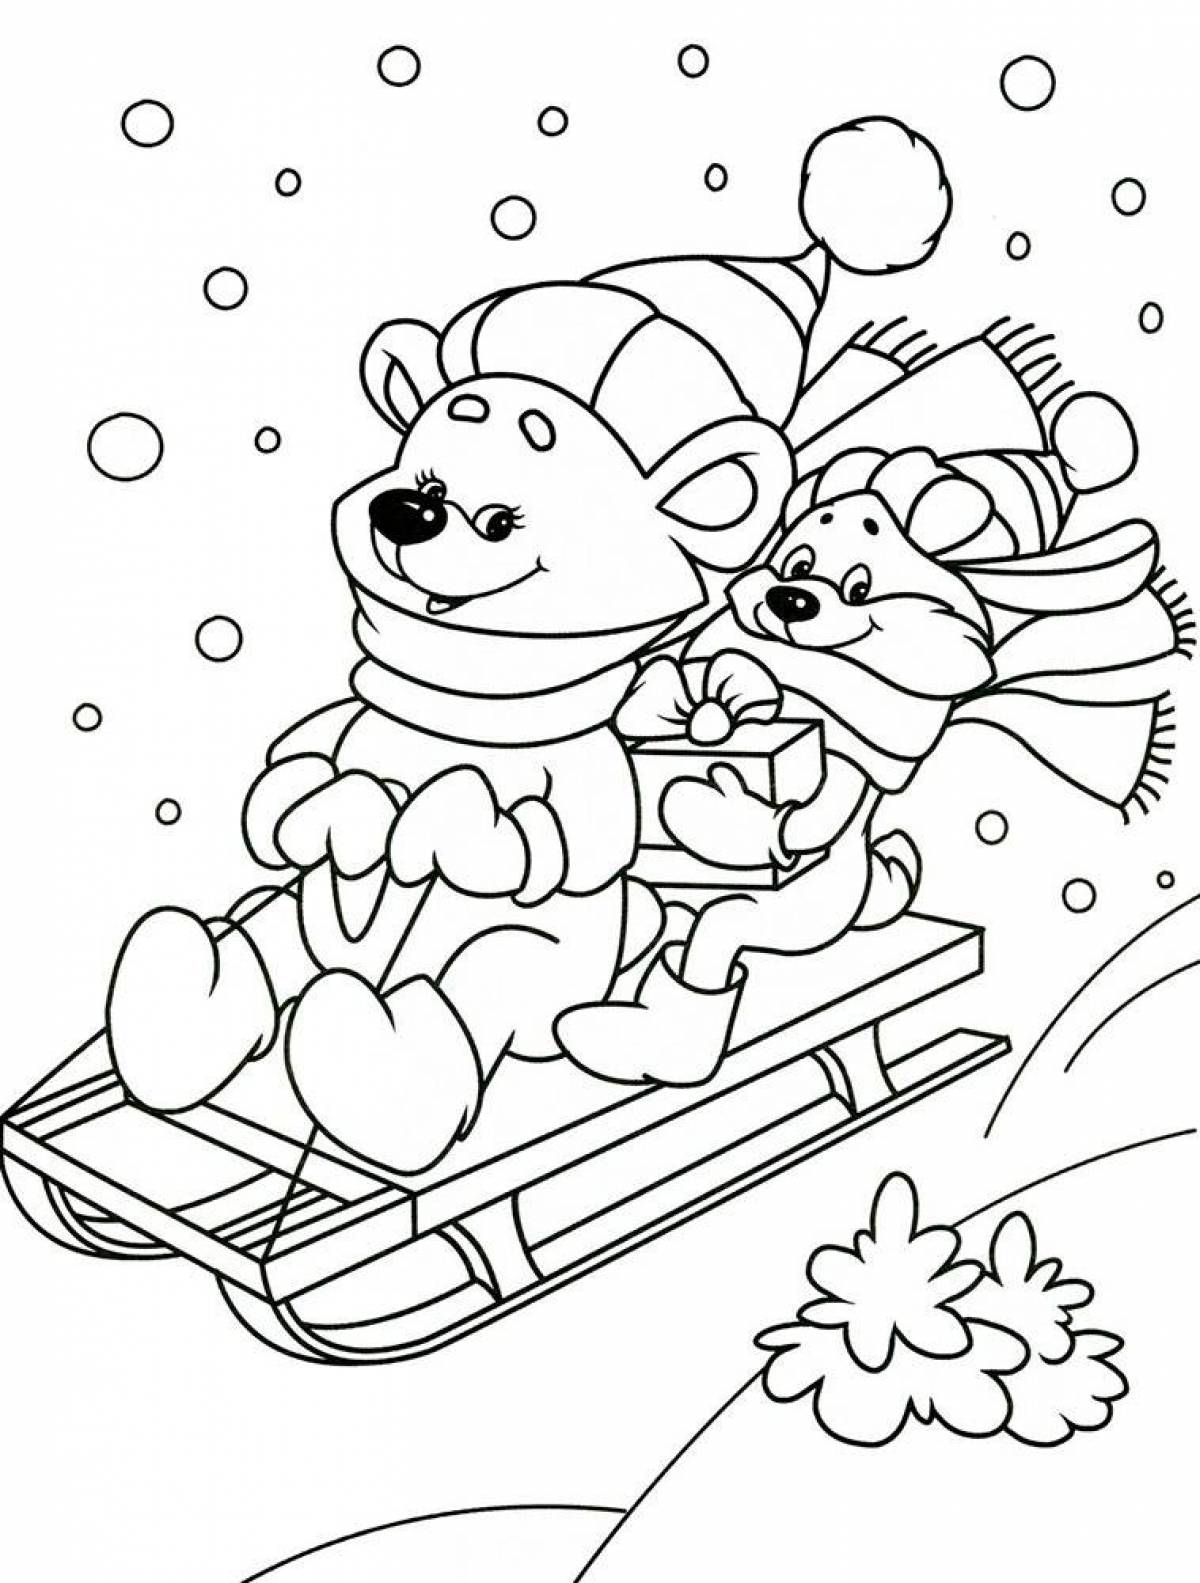 Whimsical winter coloring book for 4-5 year olds